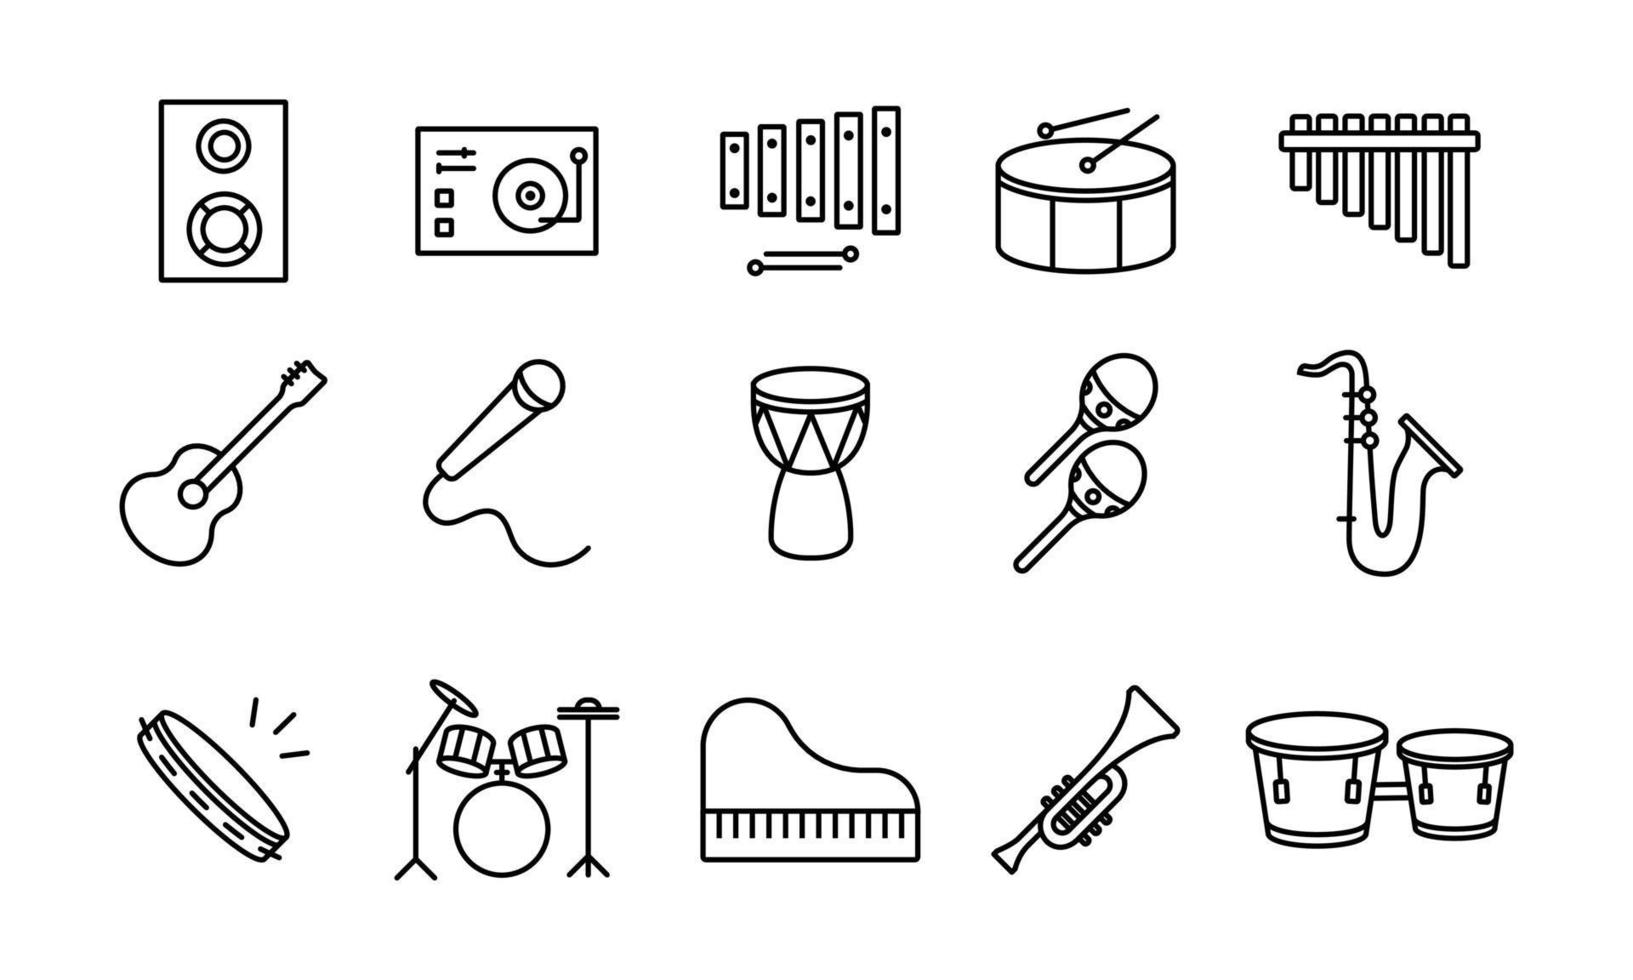 the editable stroke line icons collection related to music instrument stuff. a guitar, piano, djembe, etc that is suitable to be used as ui ux element design. vector